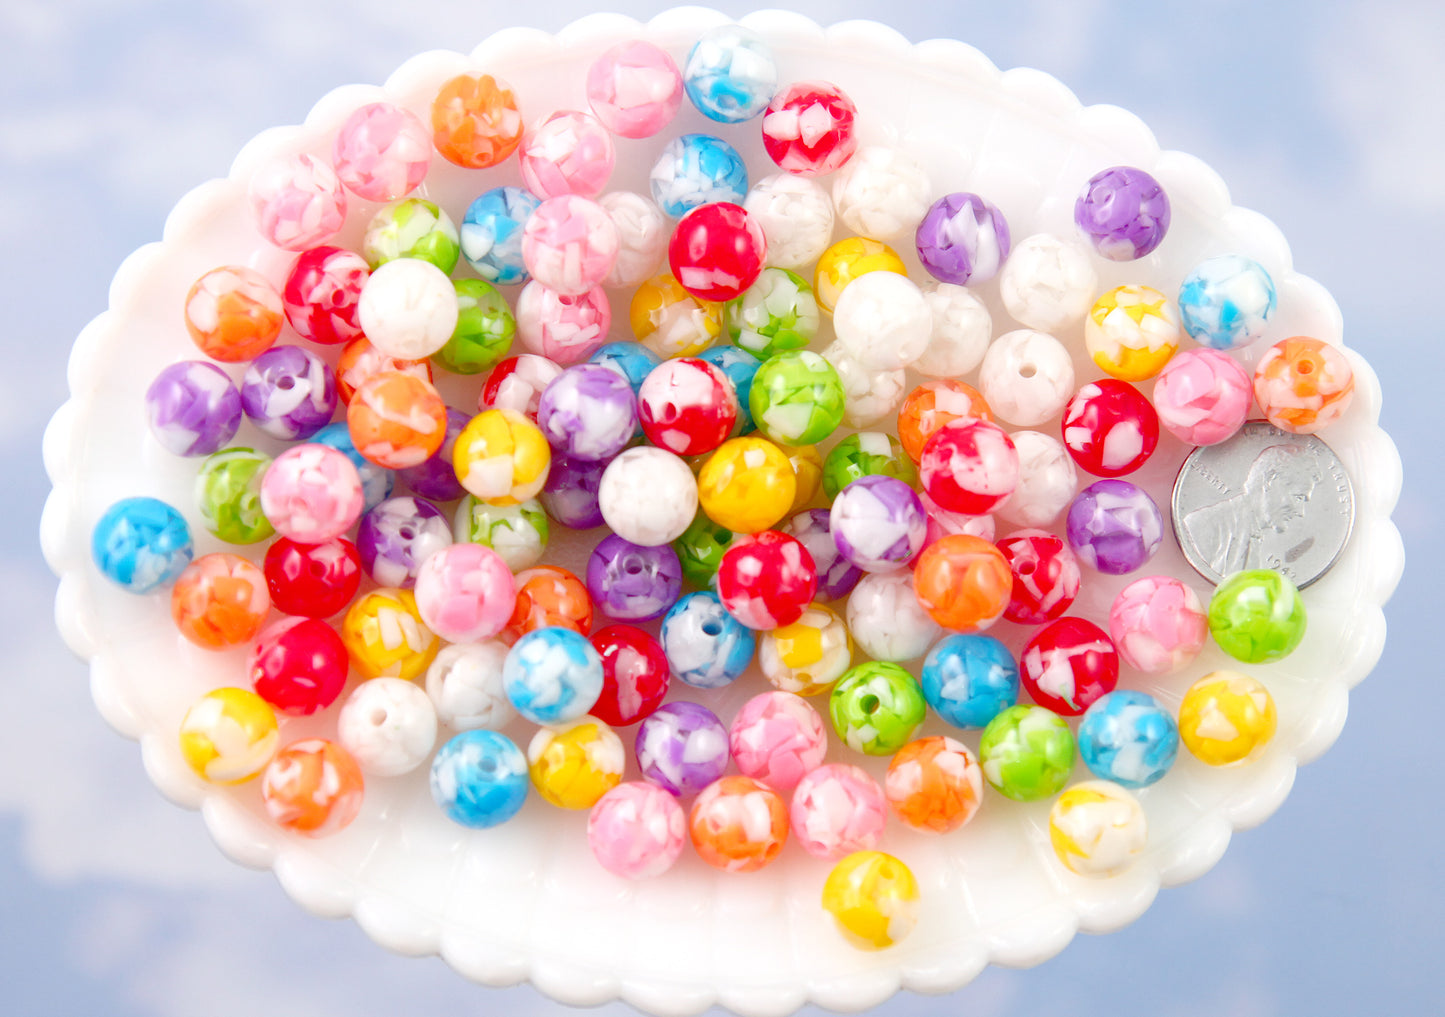 Cute Resin Beads - 10mm Colorful Tapioca Jelly Candy Marble Acrylic or Resin Beads - mixed color, small size beads - 56 pcs set